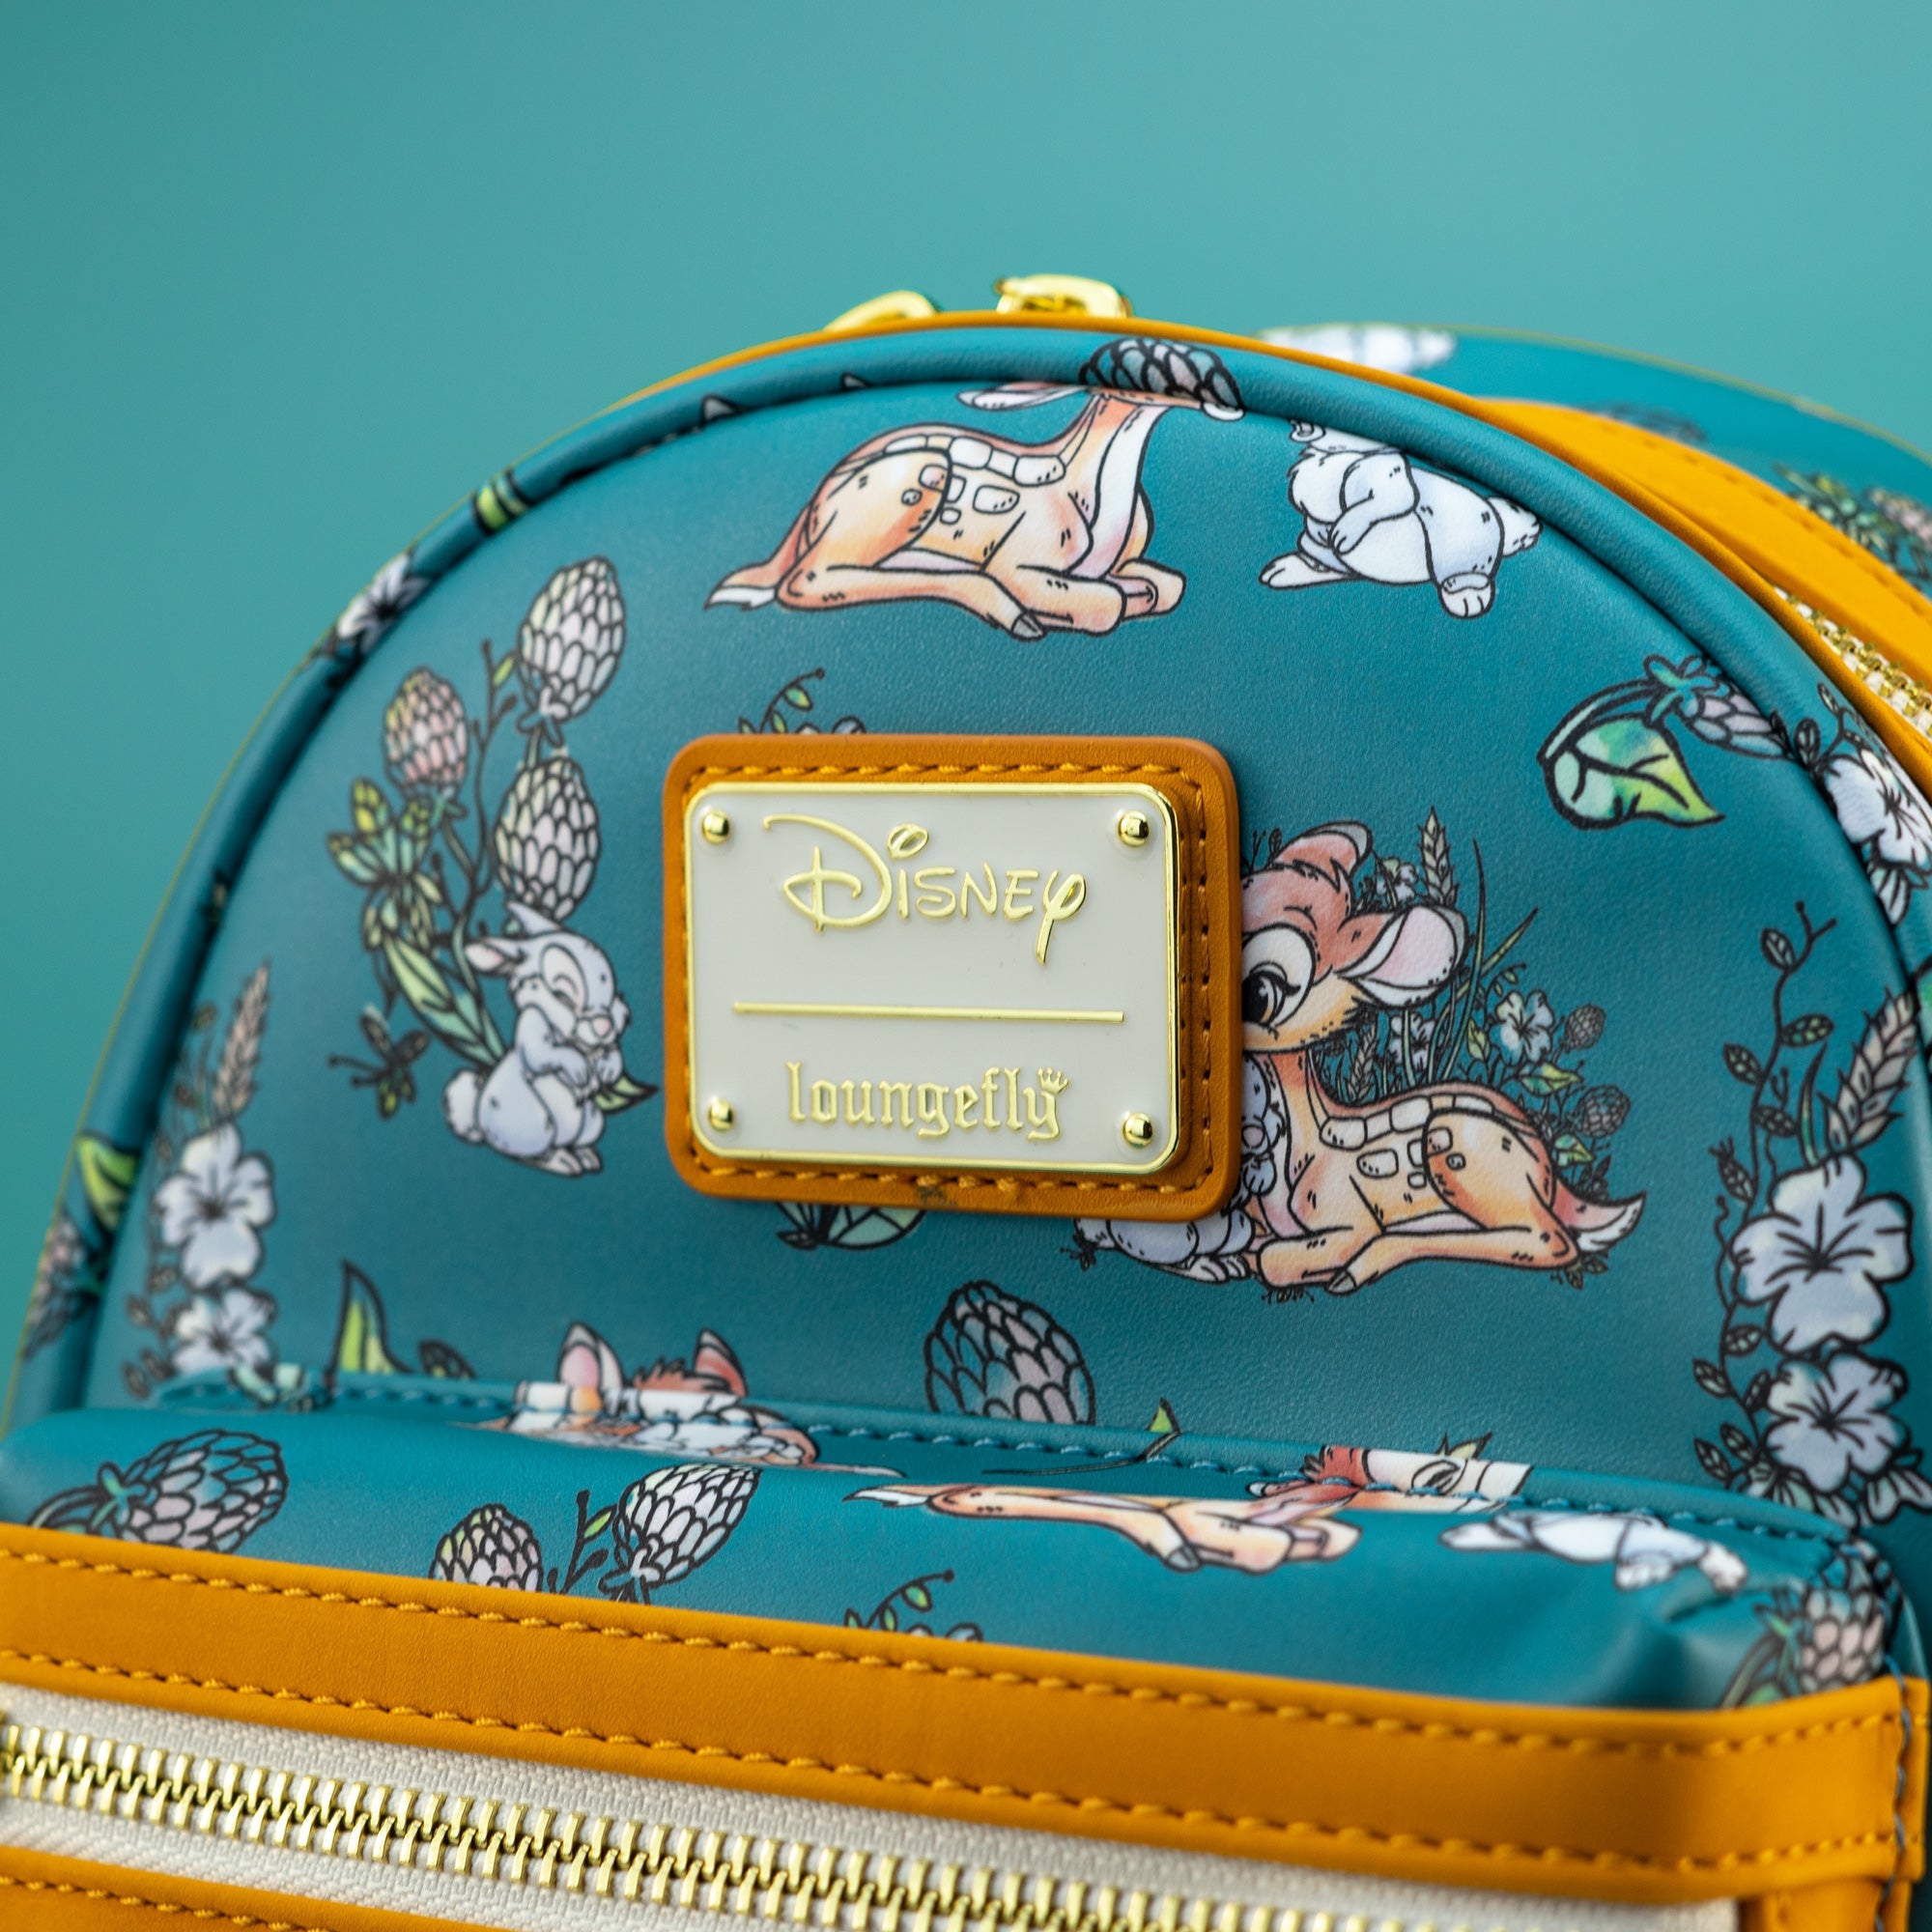 Loungefly x Disney Bambi Floral All Over Print Mini Backpack - GeekCore